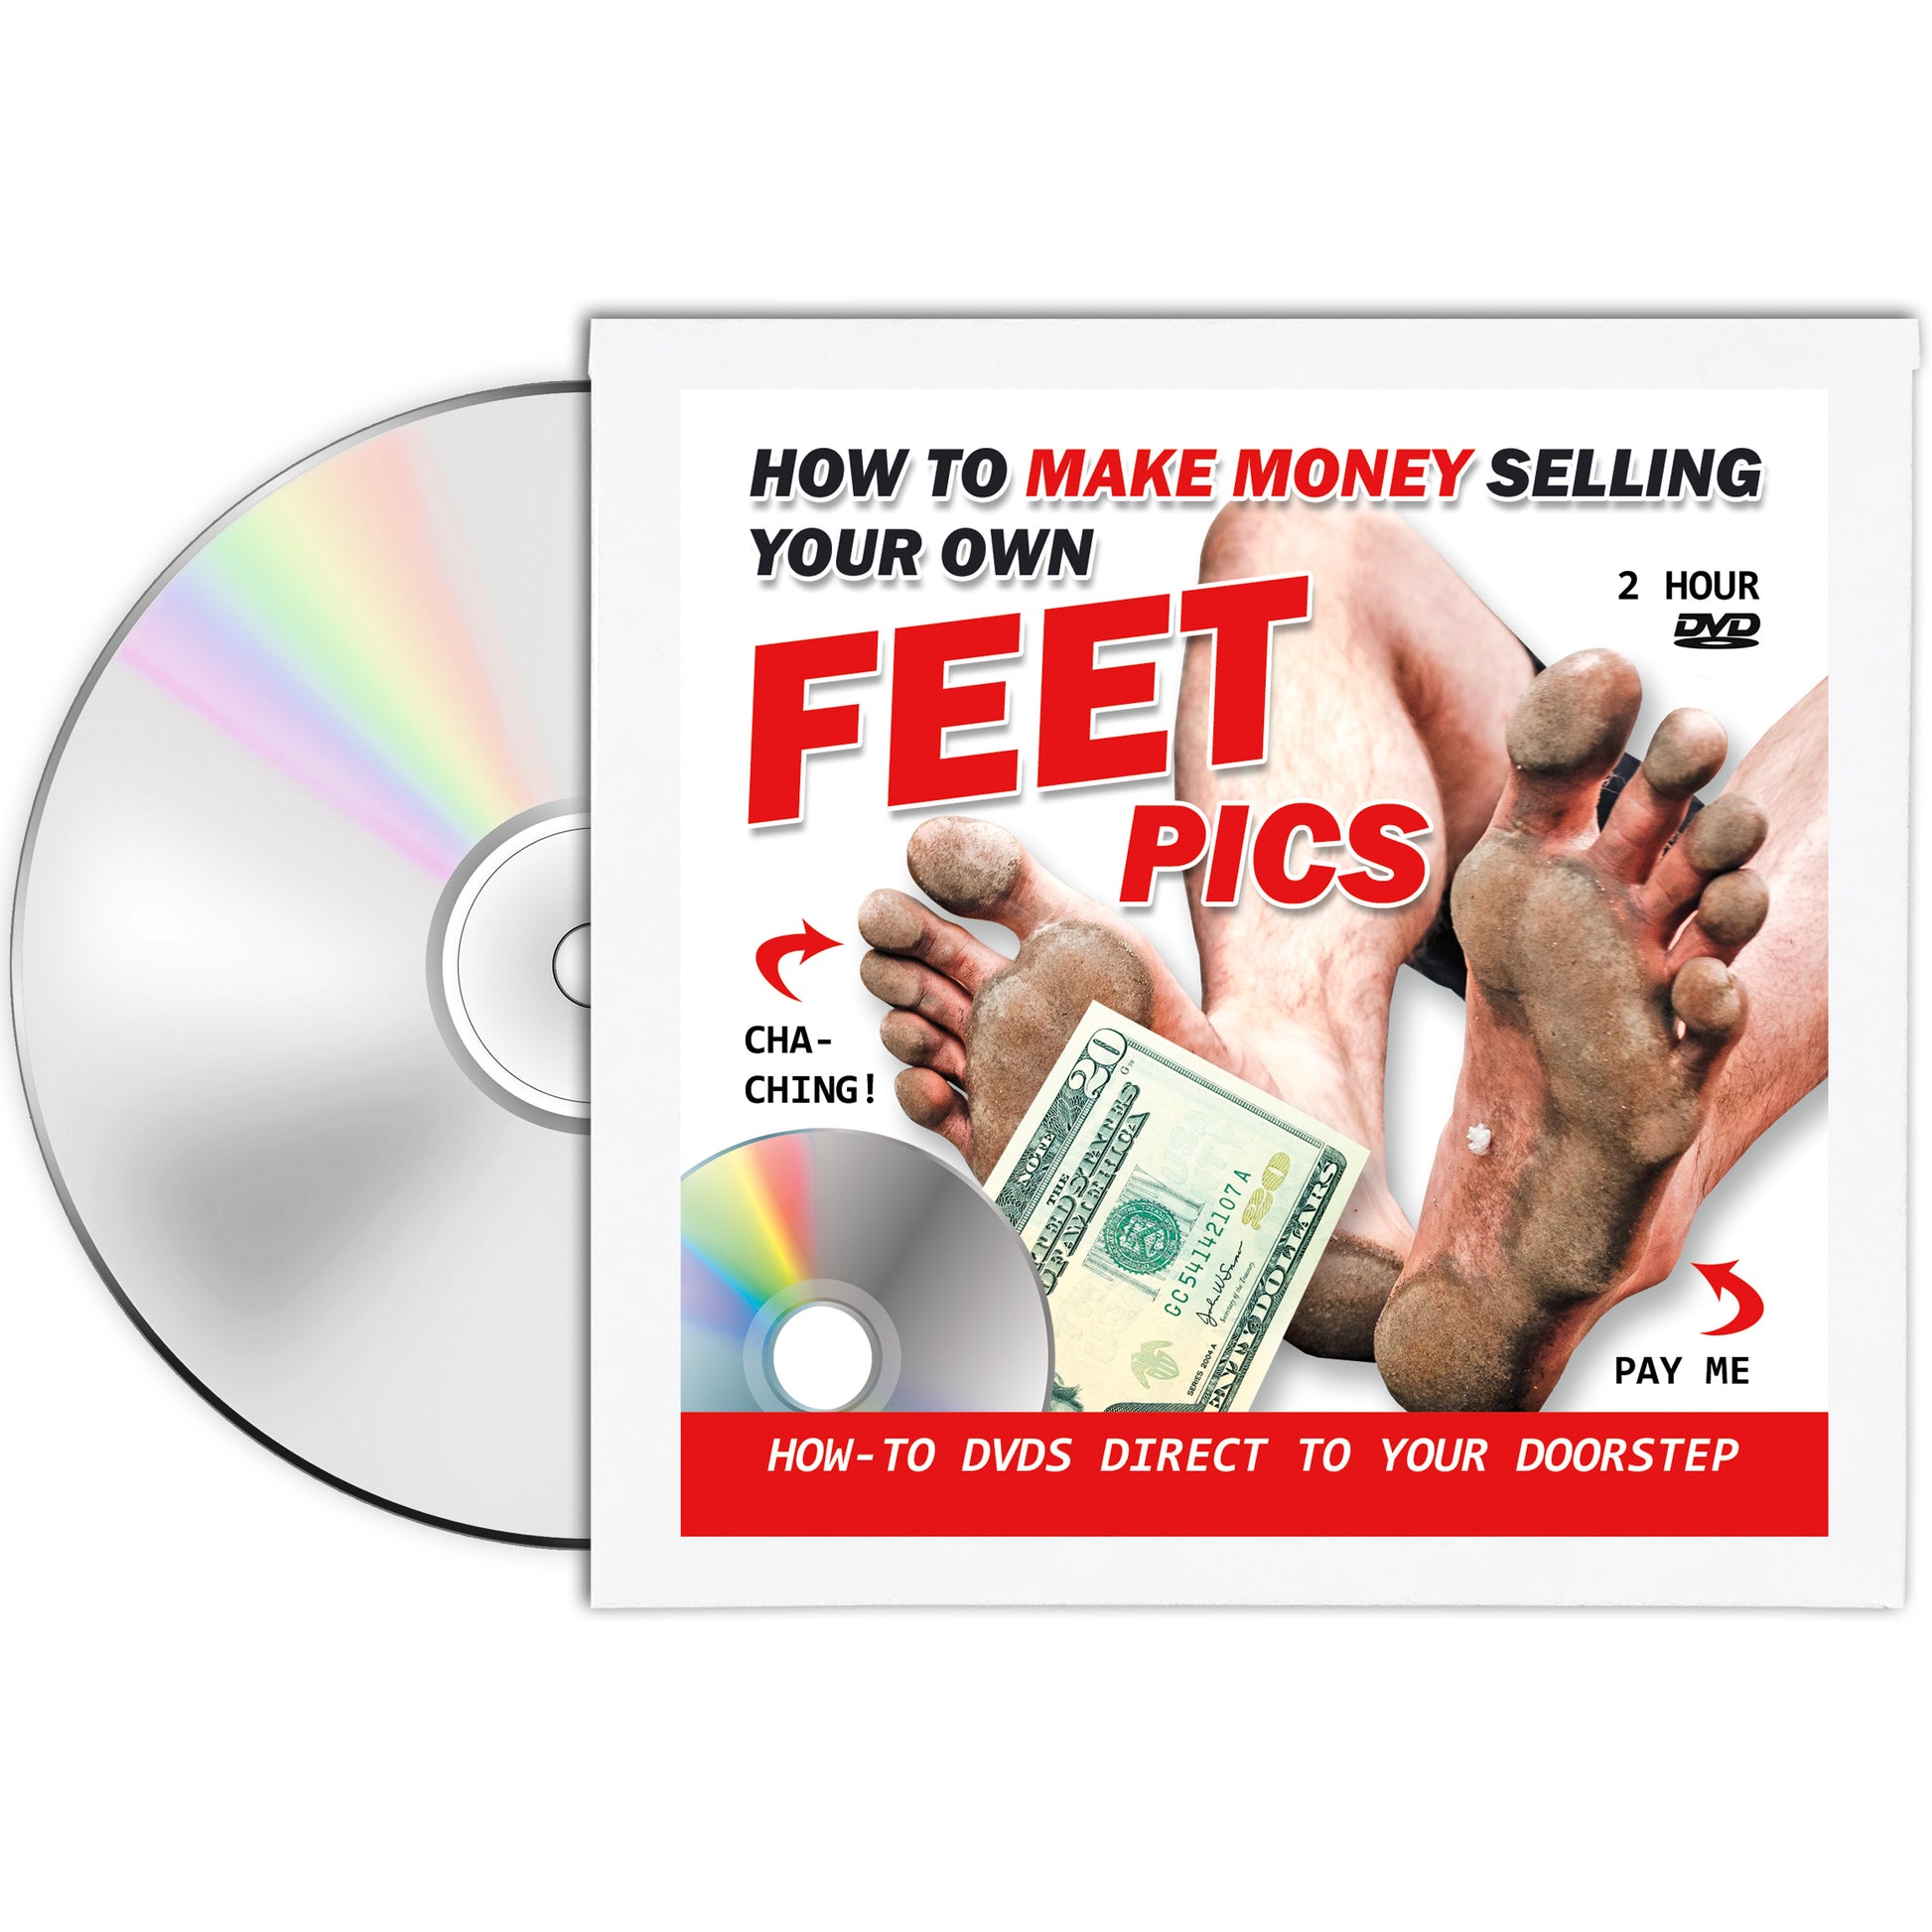 How To Make Money Selling Your Own Feet Pics